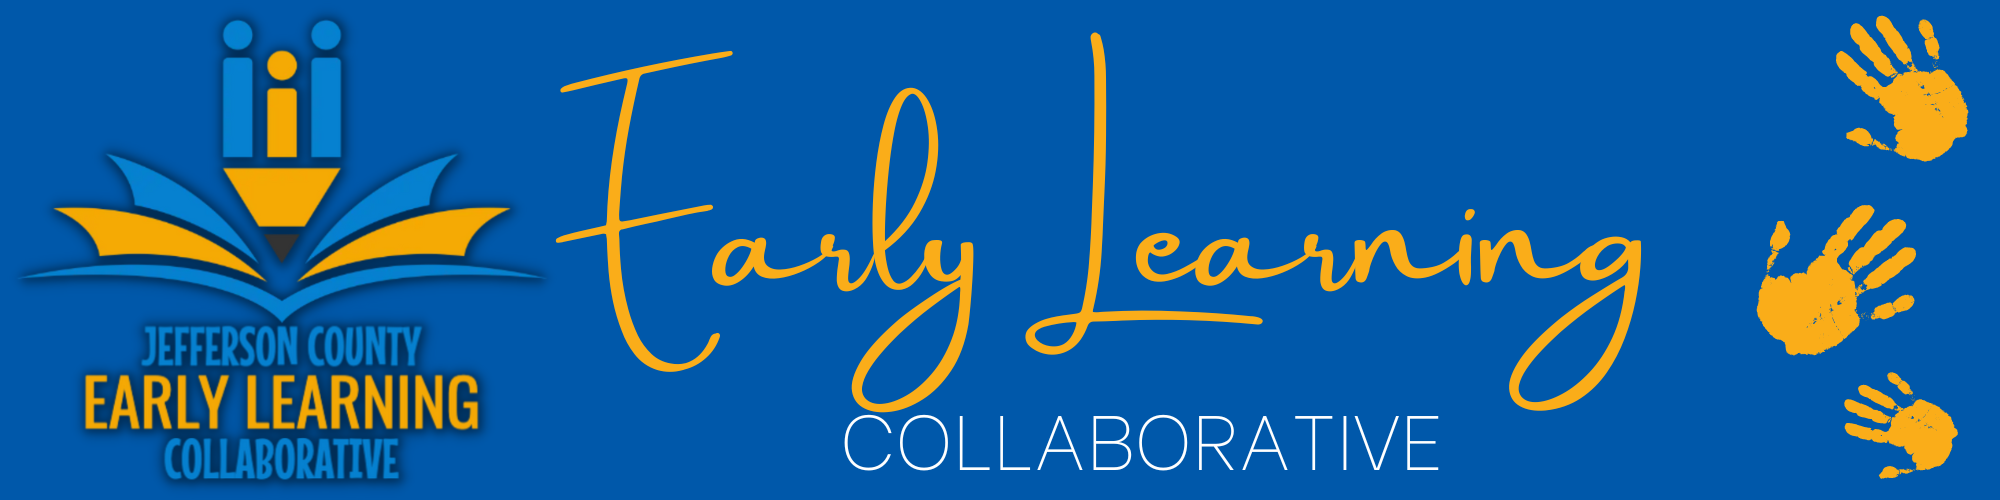 early learning collaborative